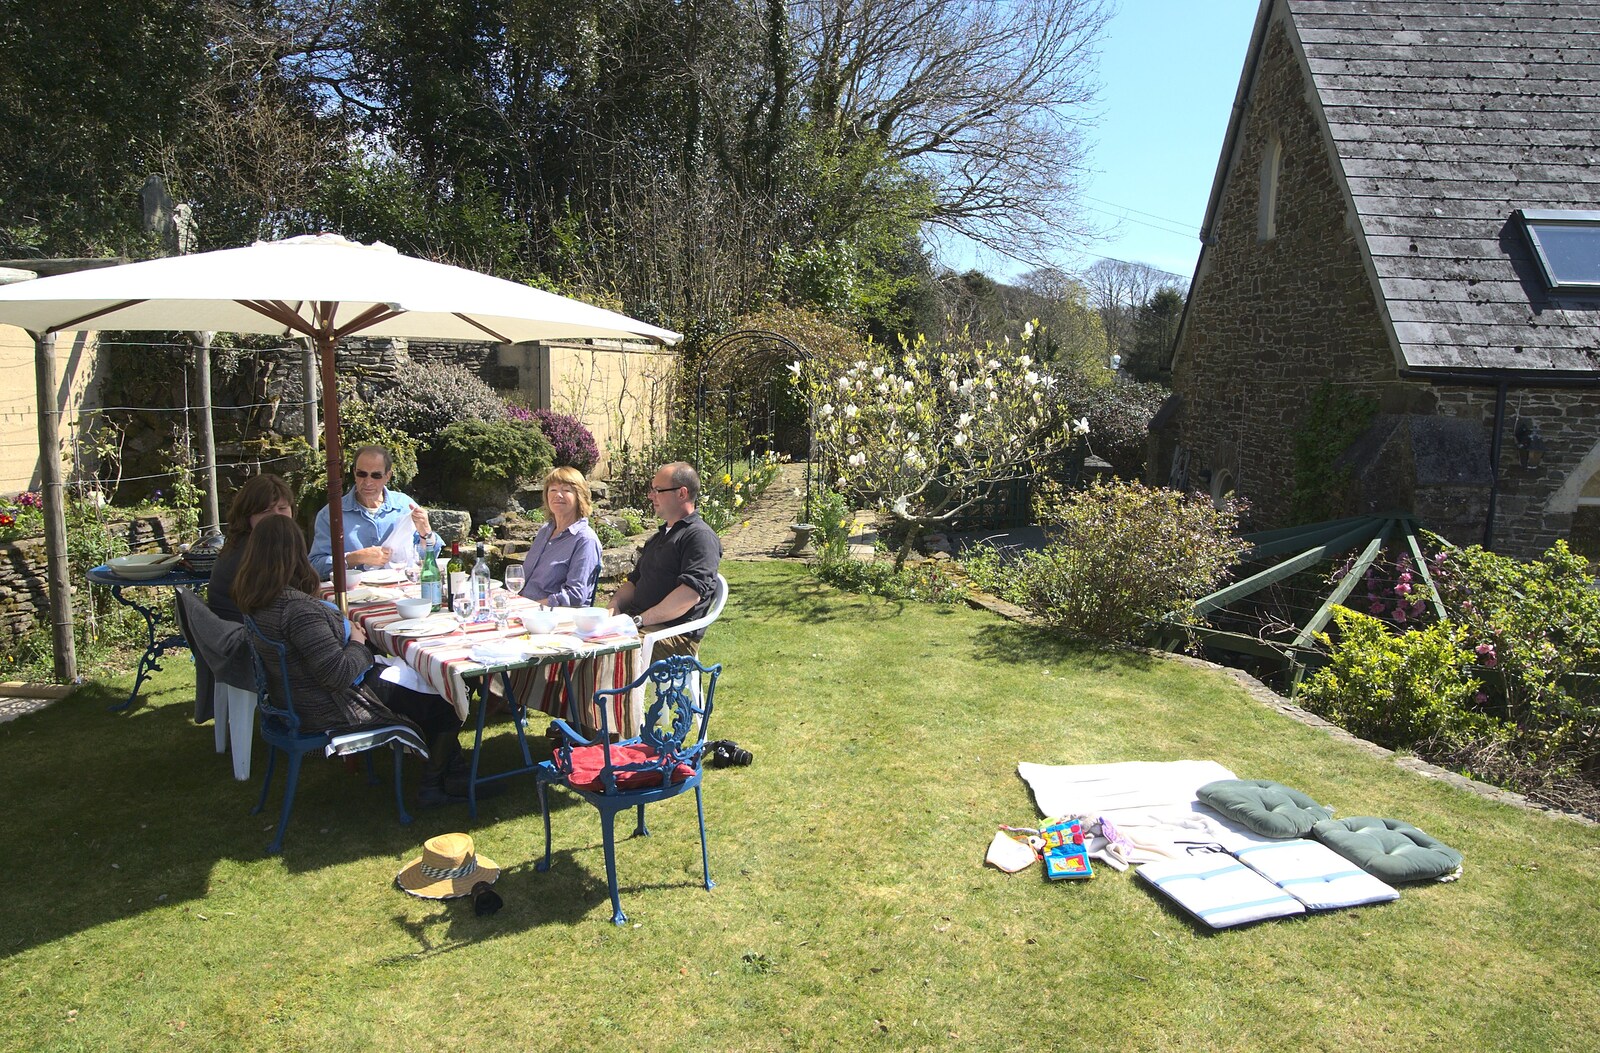 Garden lunch: even Dartmoor has nice weather from An Easter Weekend in Chagford, Devon - 12th April 2009